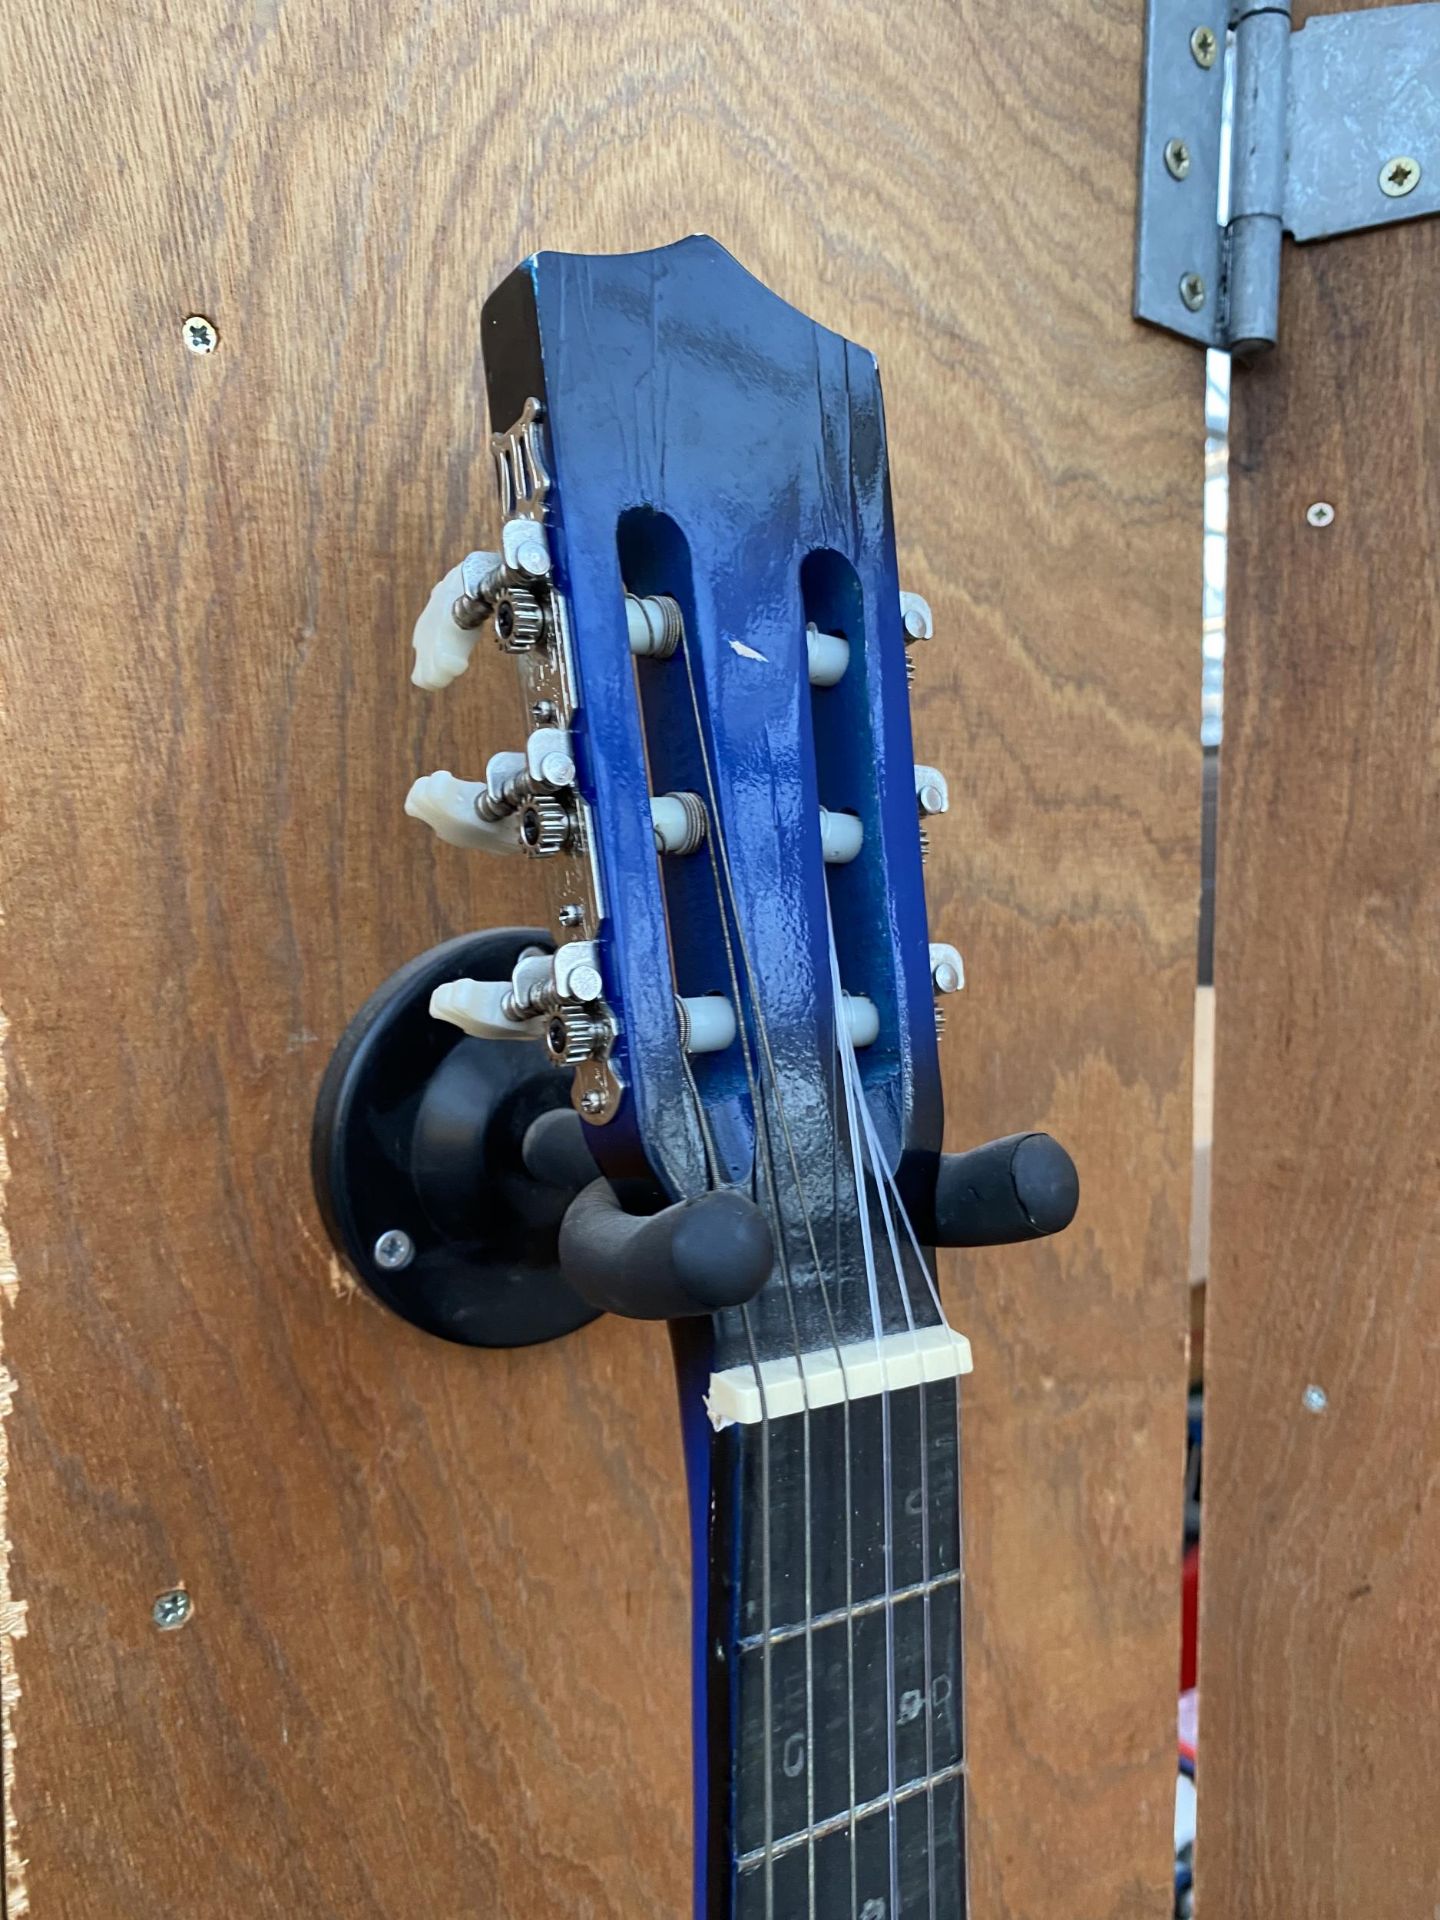 A BLUE ACOUSTIC GUITAR - Image 3 of 3